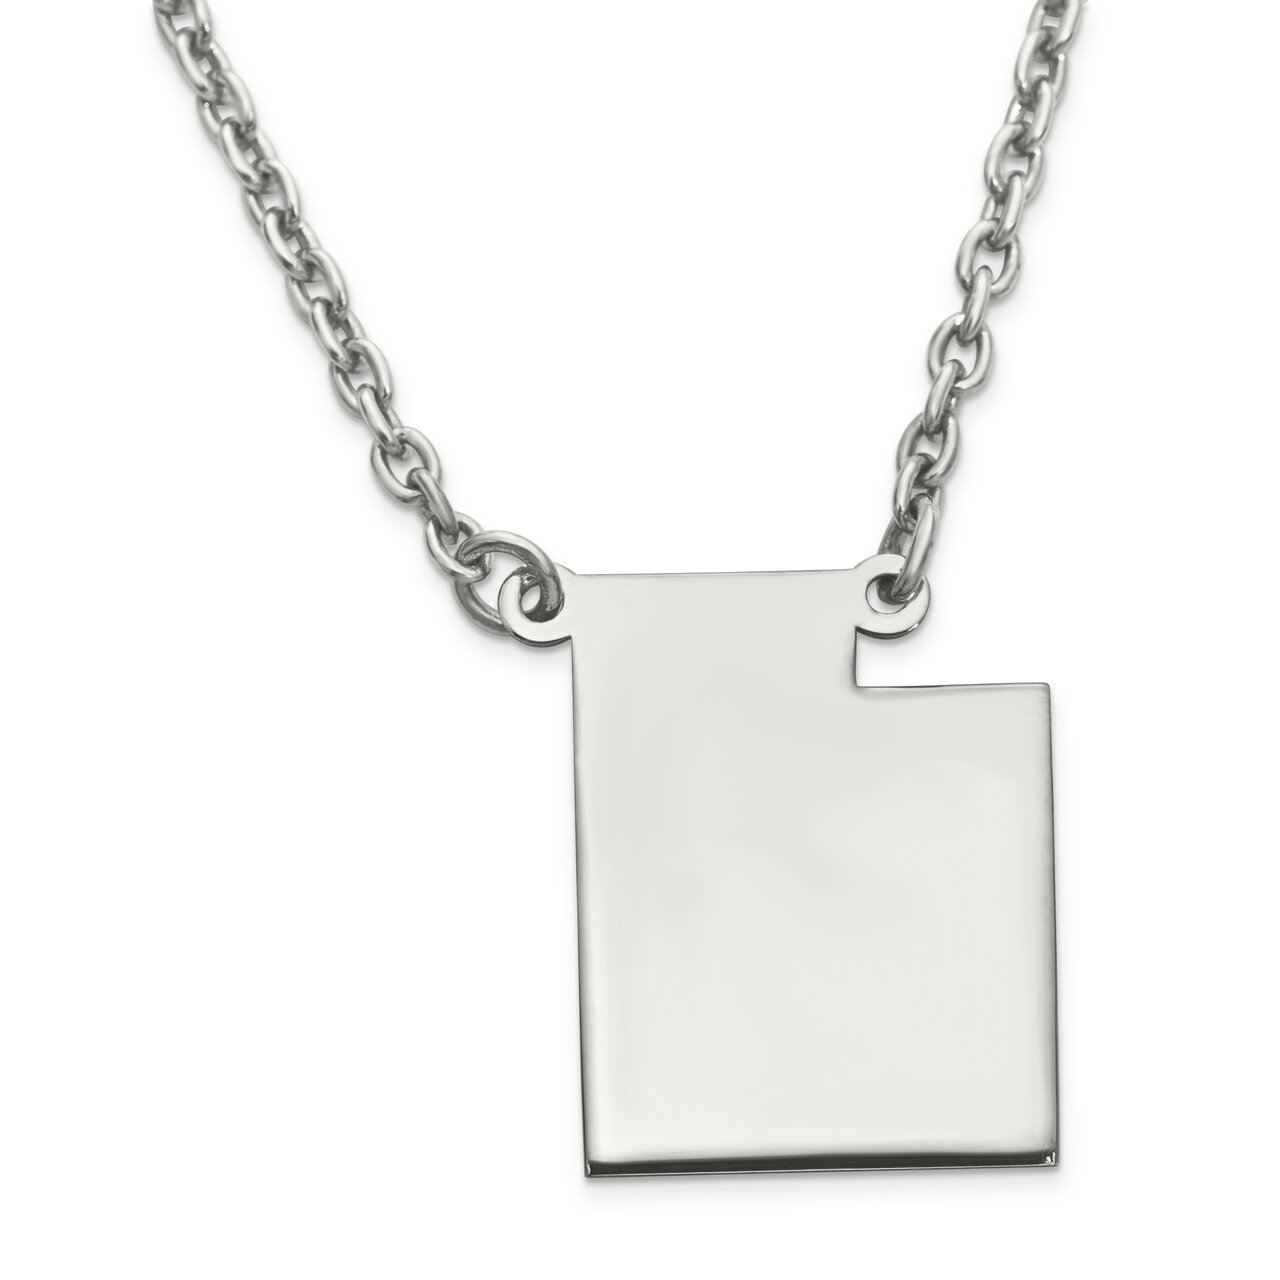 Utah State Pendant Necklace with Chain Sterling Silver Engravable XNA706SS-UT